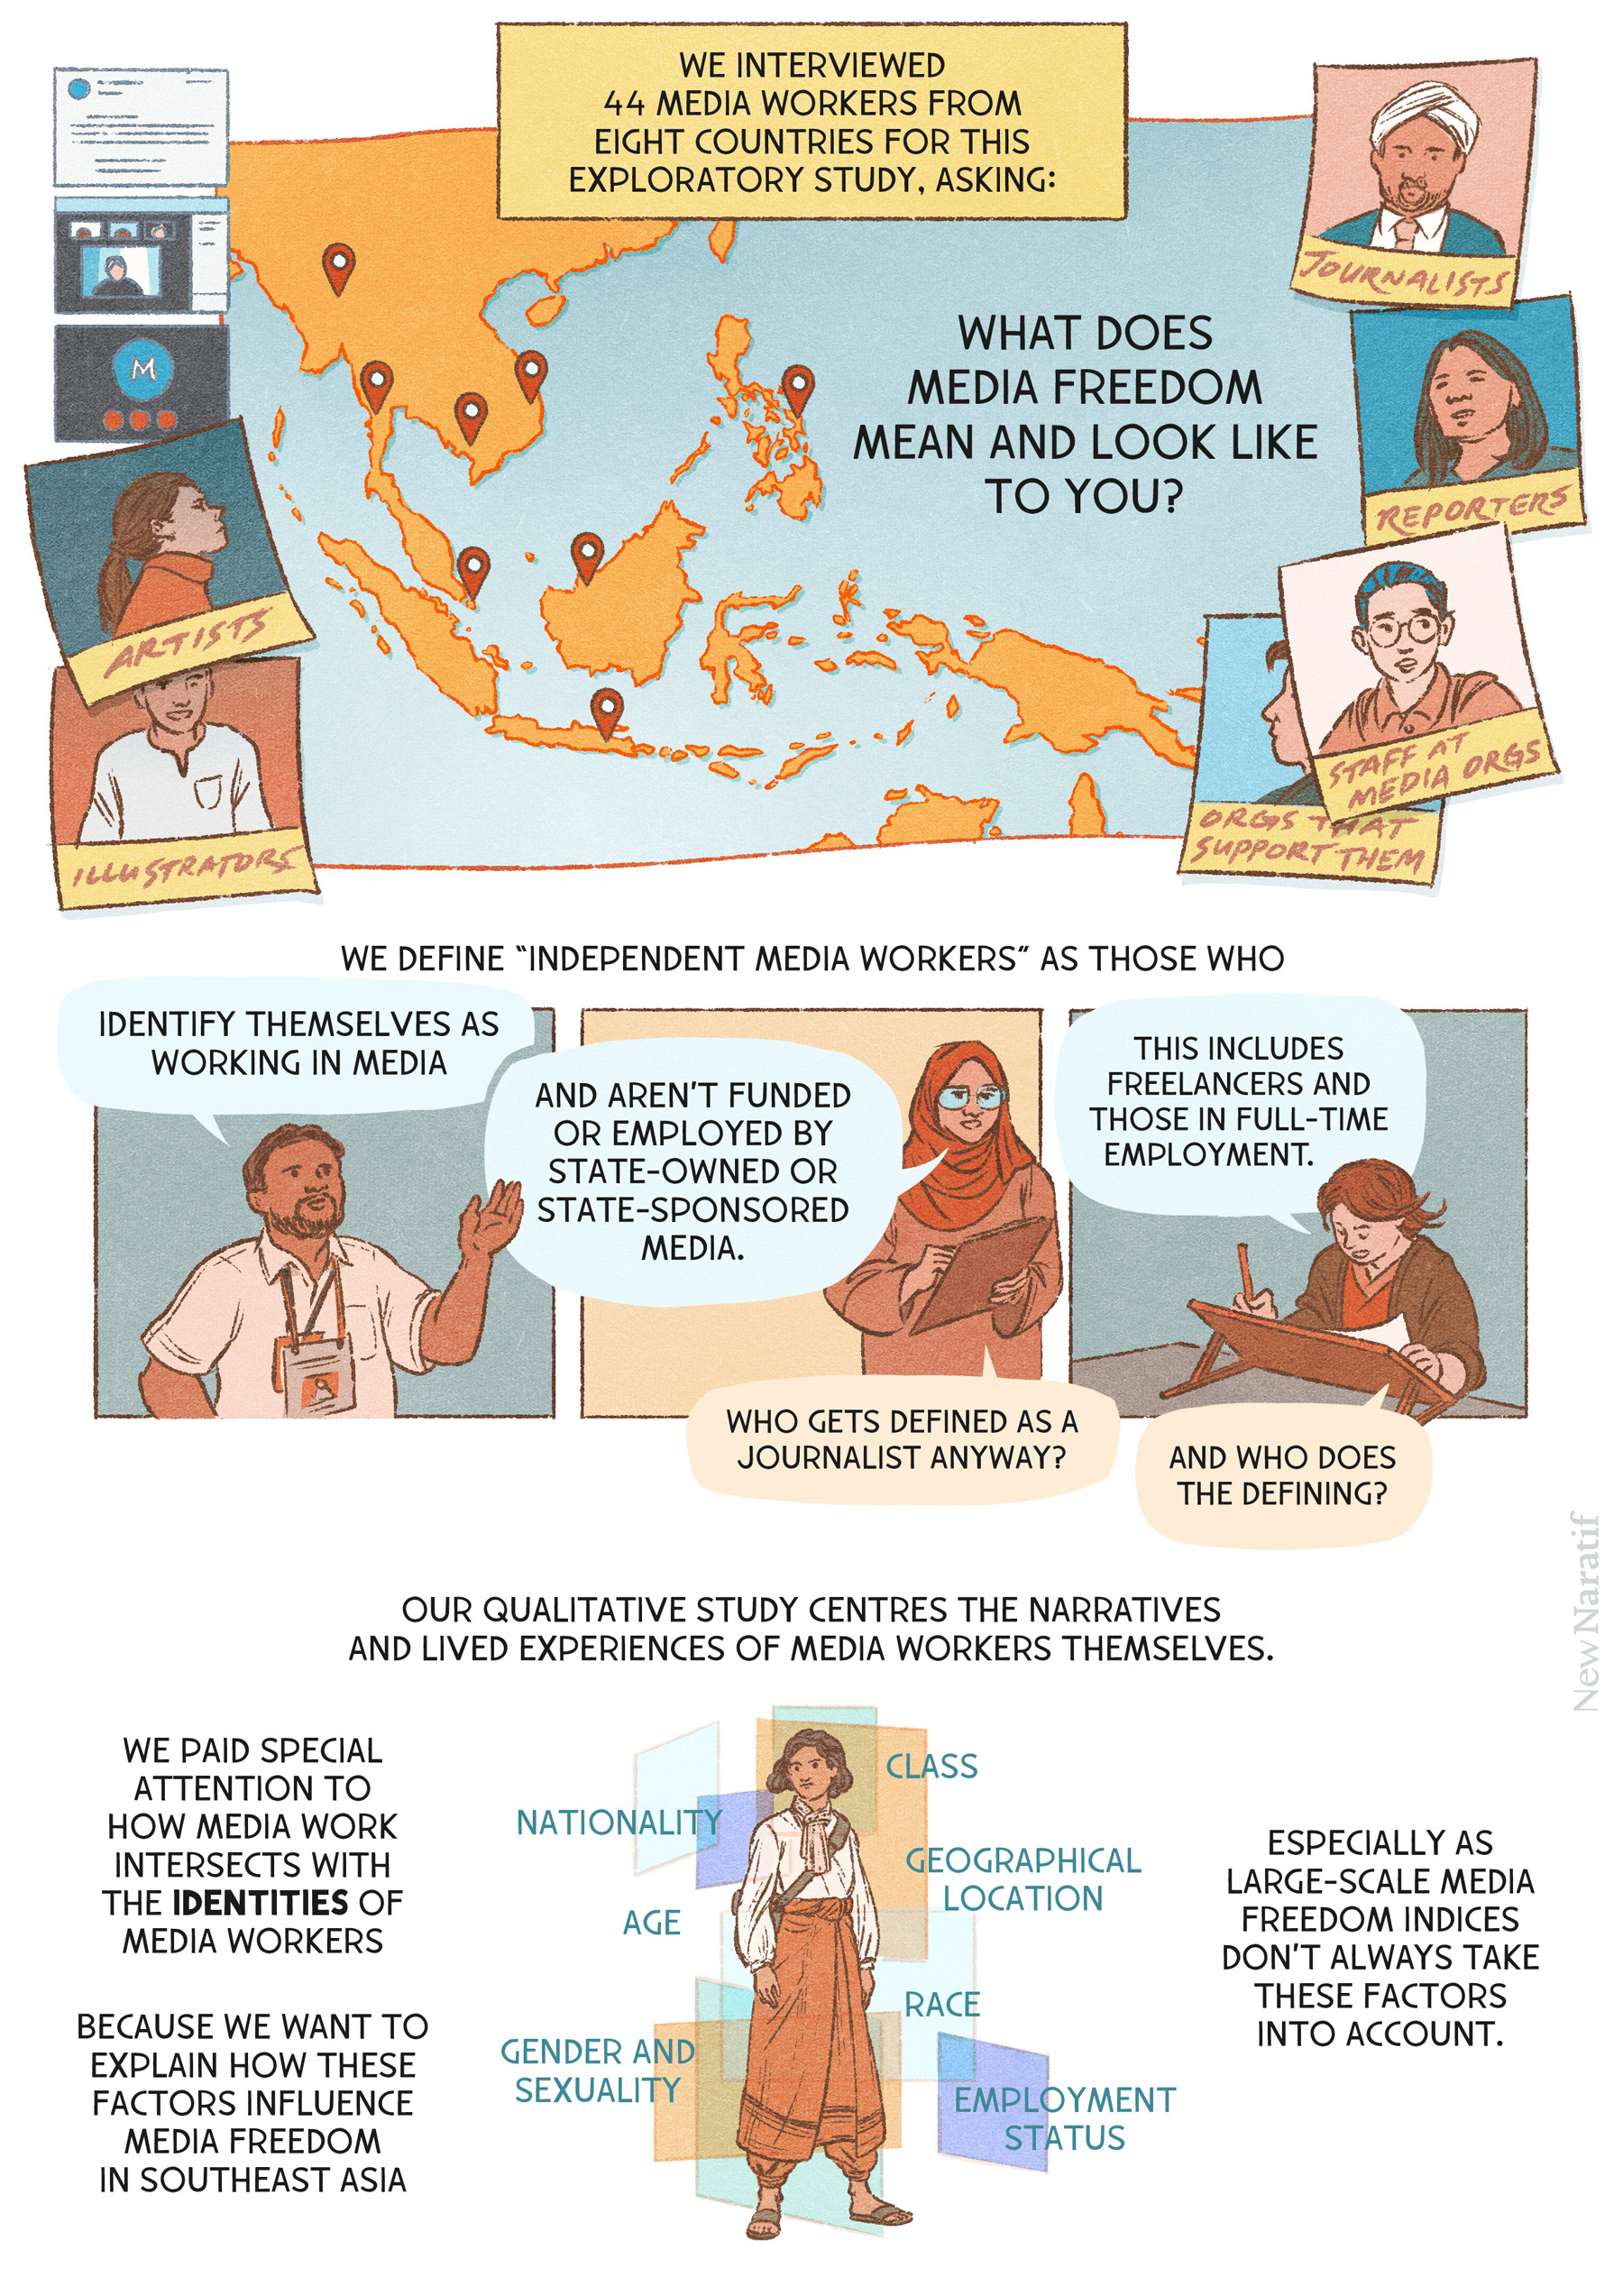 Page 1.
A comic page of 5 panels in brown lines and full colour. The narration is provided in caption boxes.
Panel 1. A map of Southeast Asia with pins indicating which countries are represented in the study. Photos stuck on the map show the kinds of media workers involved: journalists, reporters, staff at media organisations, organisations who support them, artists, illustrators. Text overlaid on the map reads: We interviewed 44 media workers from eight countries for this exploratory study, asking: What does media freedom mean and look like to you?
Panel 2 to 4 shows three media workers, one wearing a collared shirt and press tags, one in a headscarf and holding a clipboard, one sitting at a drawing table. Narration: “We define “independent media workers” as those who identify themselves as working in media and are not funded or employed by state-owned or state-sponsored media. Third media worker: “This includes freelancers and those in full-time employment.” Second media worker: “Who gets defined as a journalist anyway?” Third media worker: “And who does the defining?”
Panel 5. One person dressed in a sarong with overlapping transparent frames on them, and labels indicating some of the markers of identity which were used: class, age, race, gender and sexuality, nationality, geographical location, employment status. Narration: “Our qualitative study centres the narratives and lived experiences of media workers themselves. We paid special attention to how media work intersects with the identities of media workers because we want to explain how these factors influence media freedom in Southeast Asia. Especially as large-scale media freedom indices don’t always take these factors into account.”